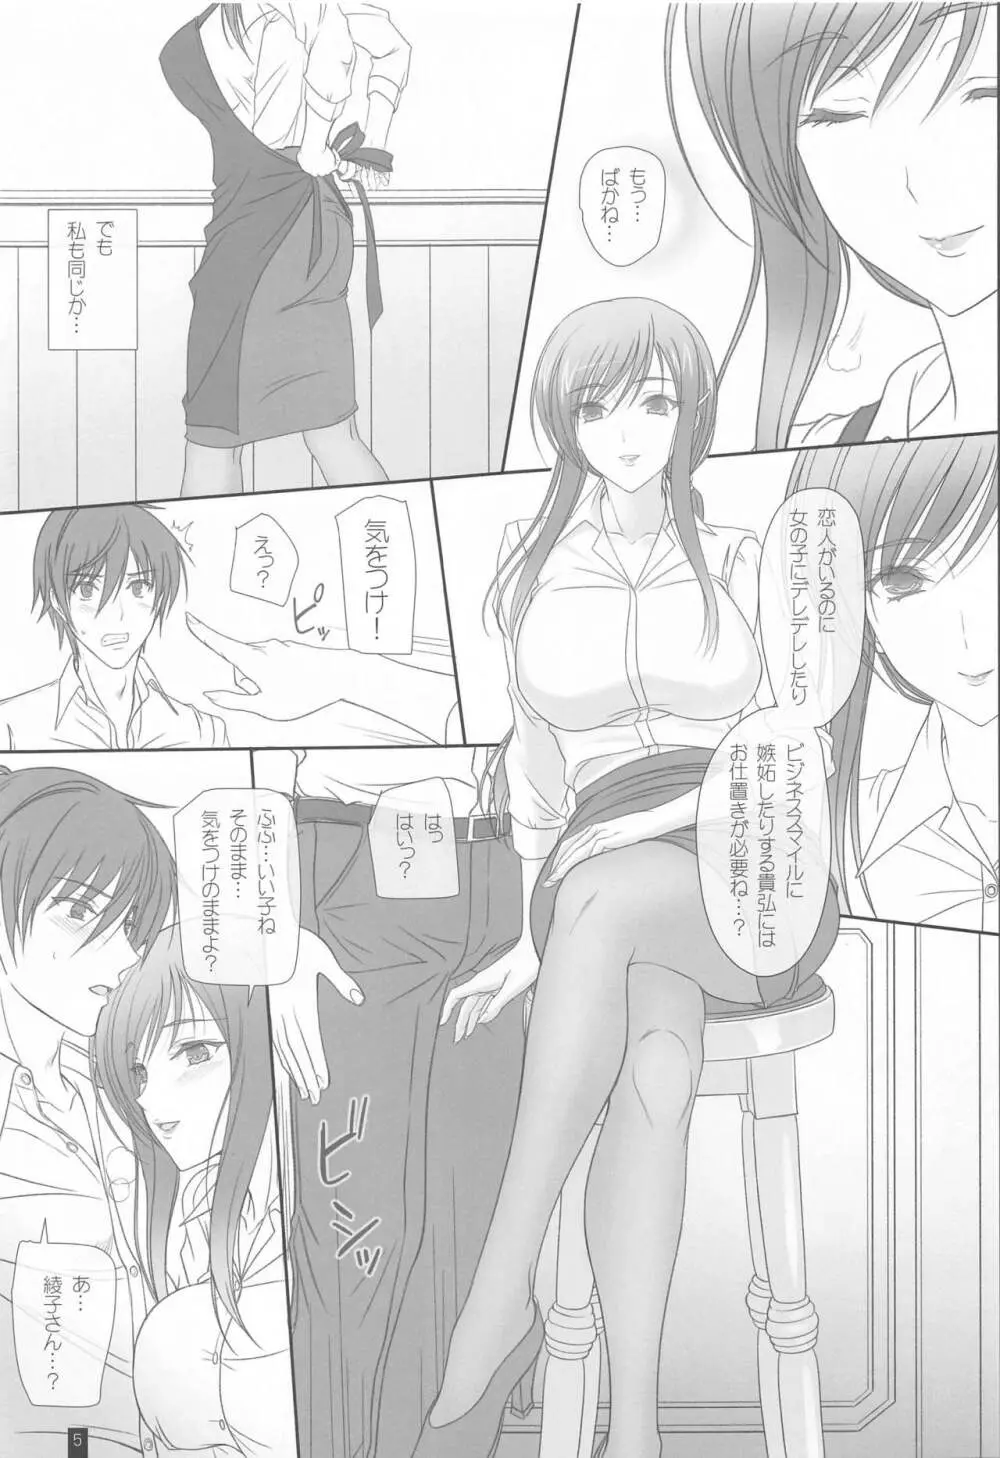 Oh Ayako! More! & More!! Page.4